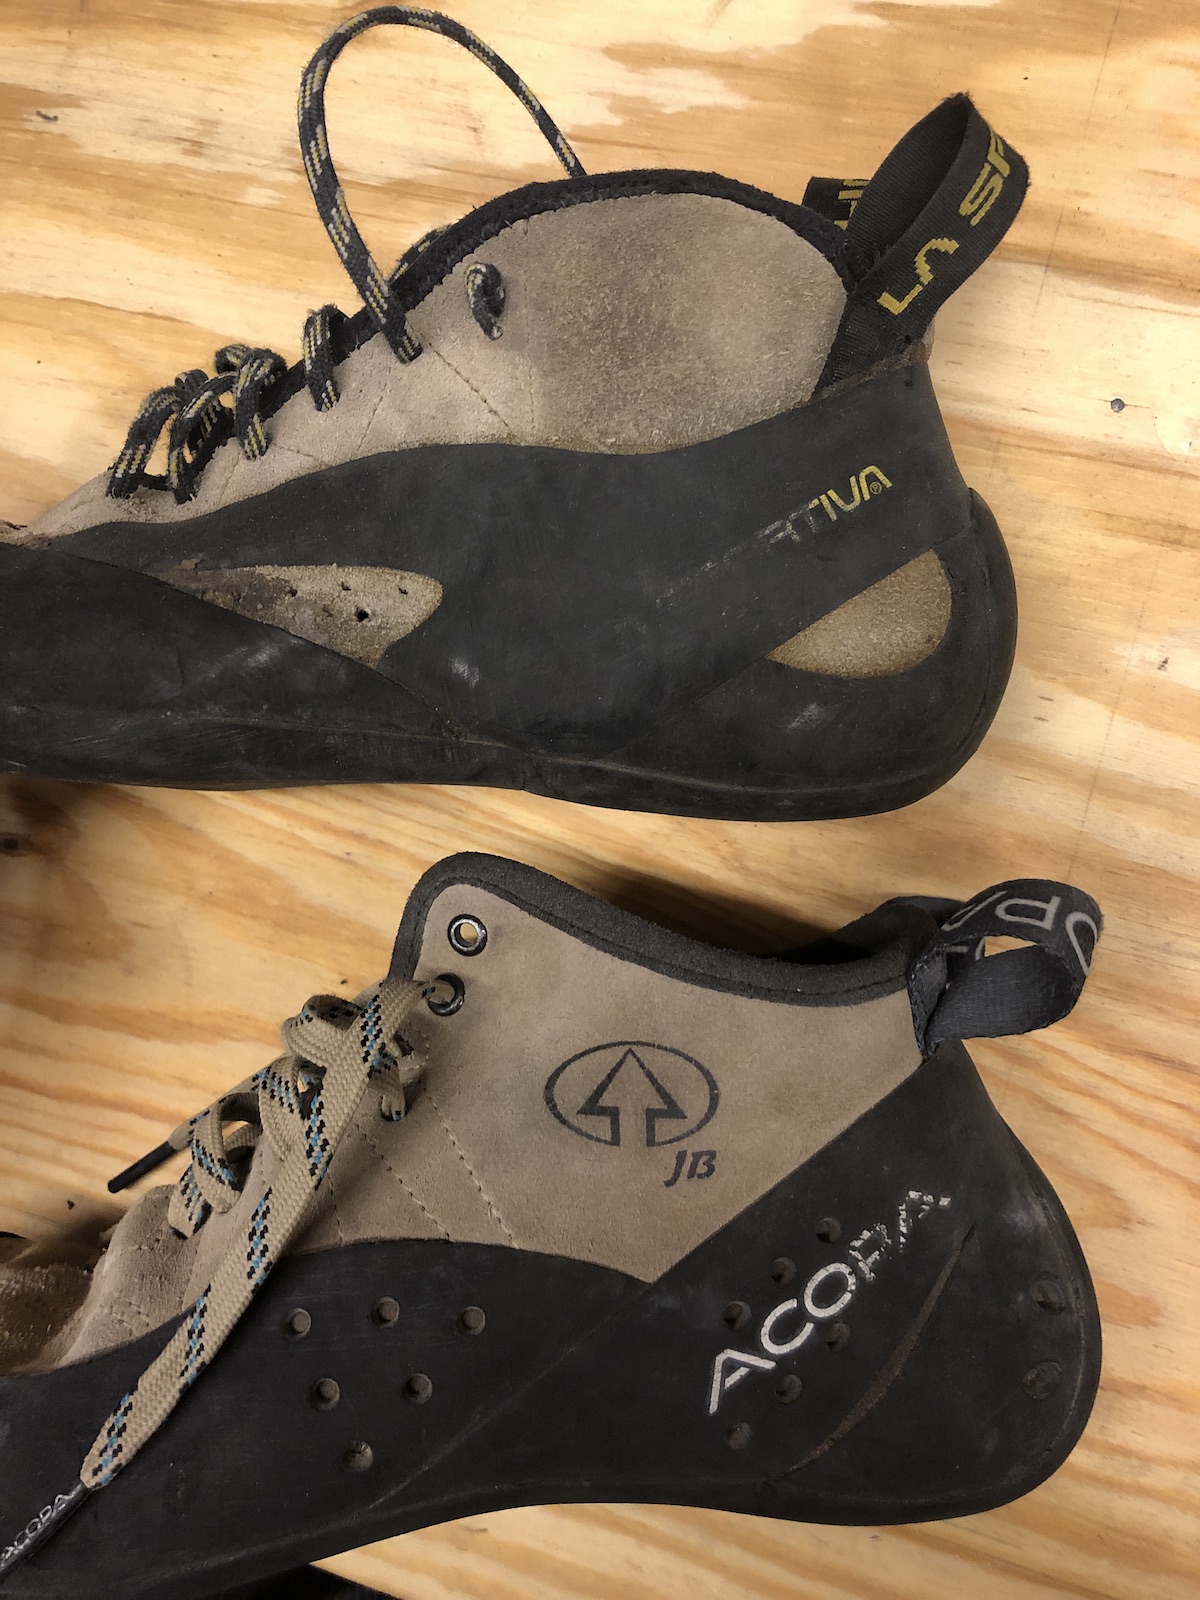 Comparing the ankle cut on the La Sportiva TC Pro (top) with the Acopa JB. [Photo] Chris Kalman